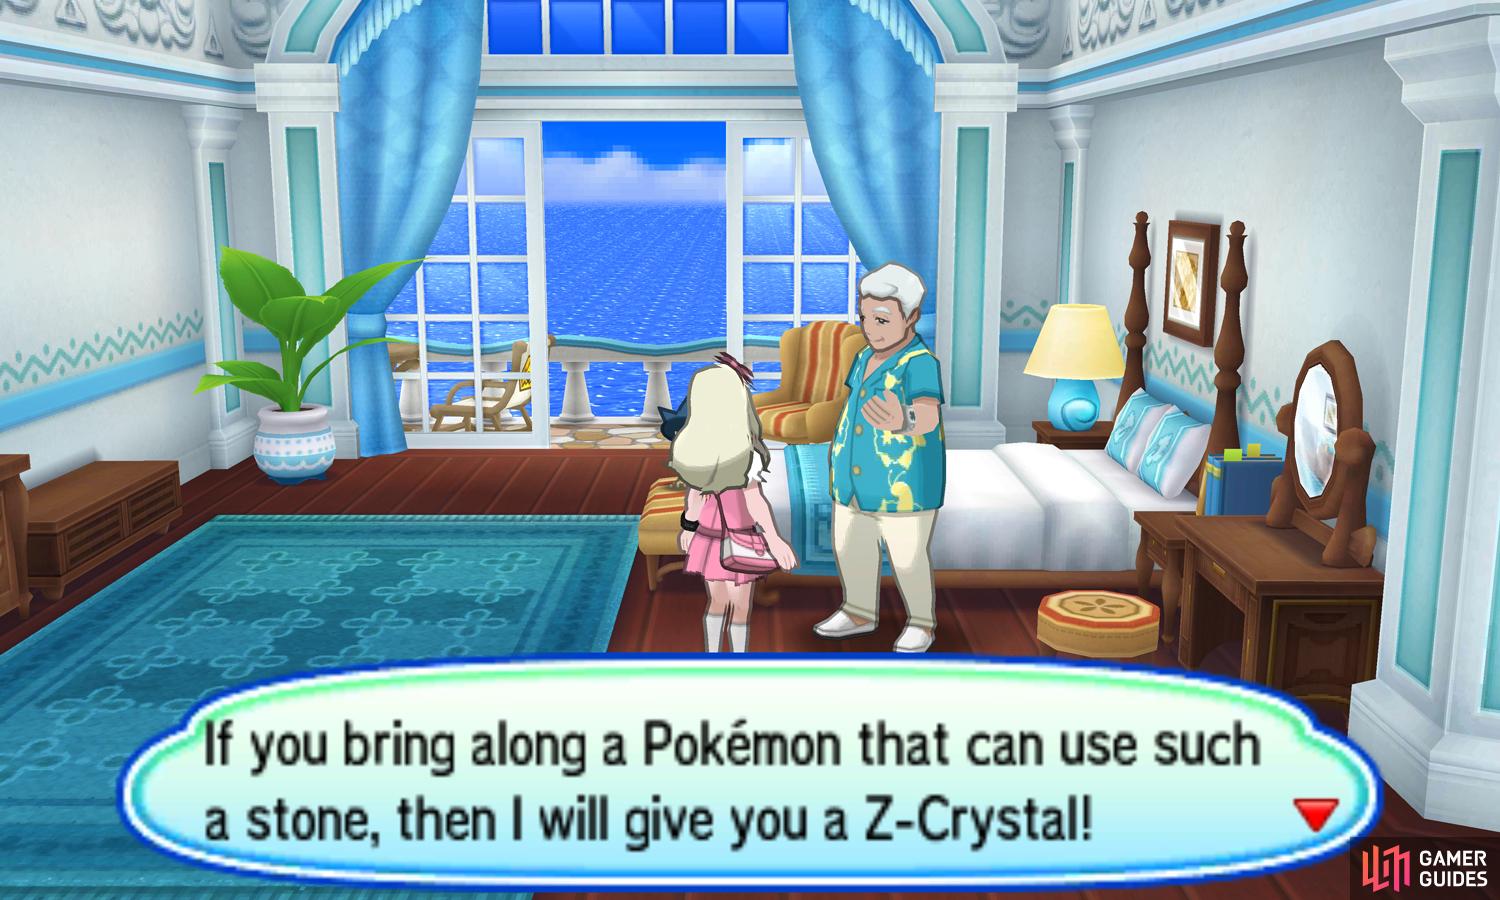 Z-Crystals can't be traded, so old event Z-Crystals can now be obtained in-game.